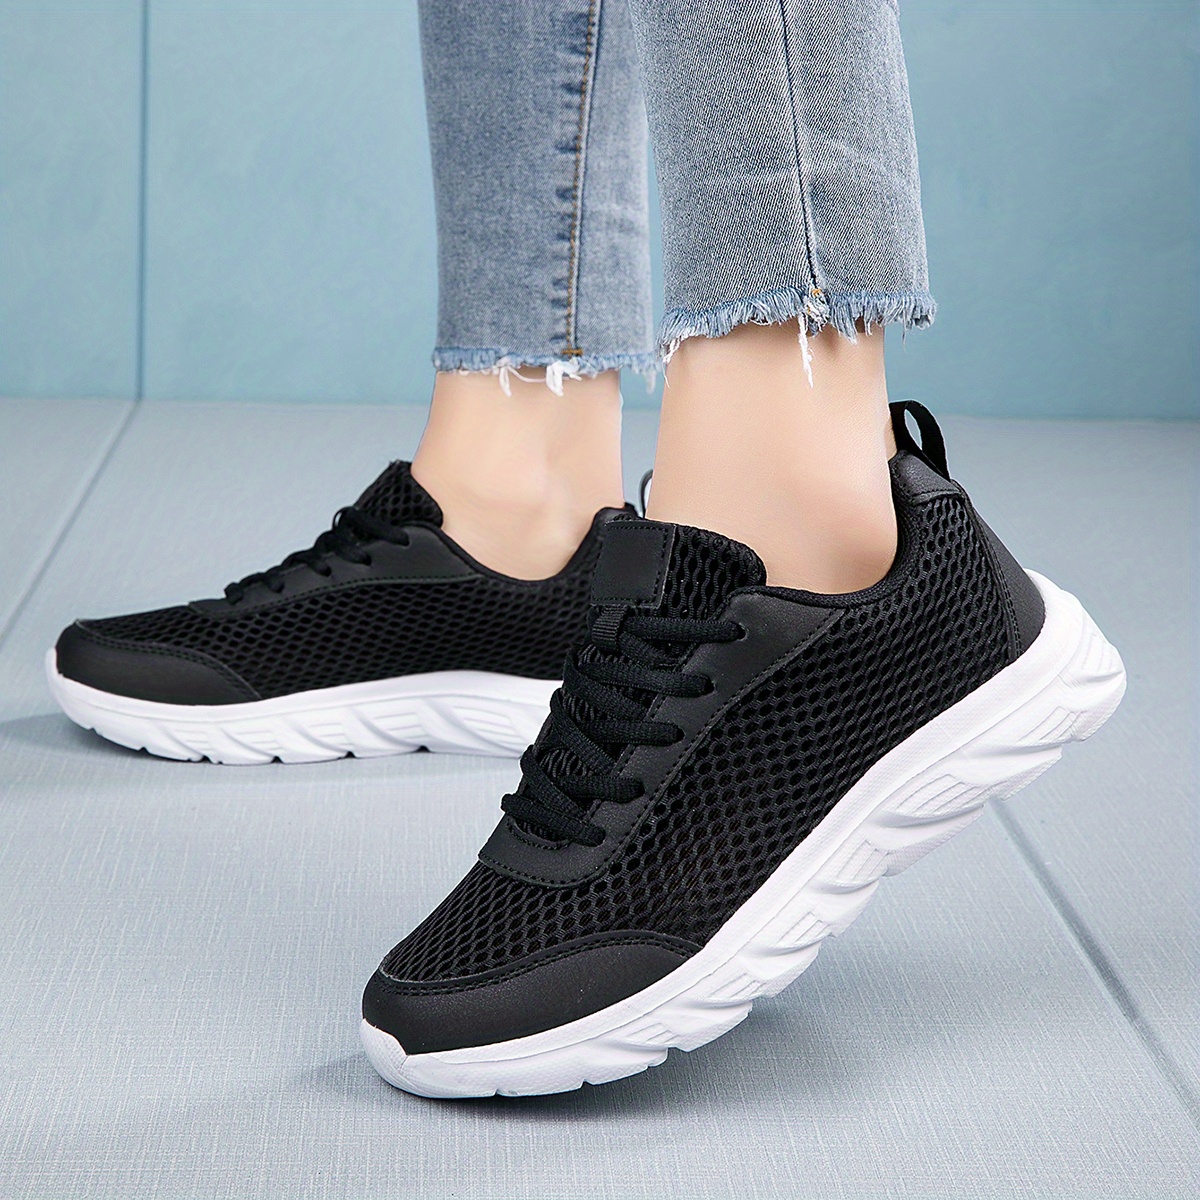 PMUYBHF Womens Sneakers Black Size 10 Womens Shoes Casual Mesh Laace Up  Solid Color Fashion Simple Shoes Running Shoes